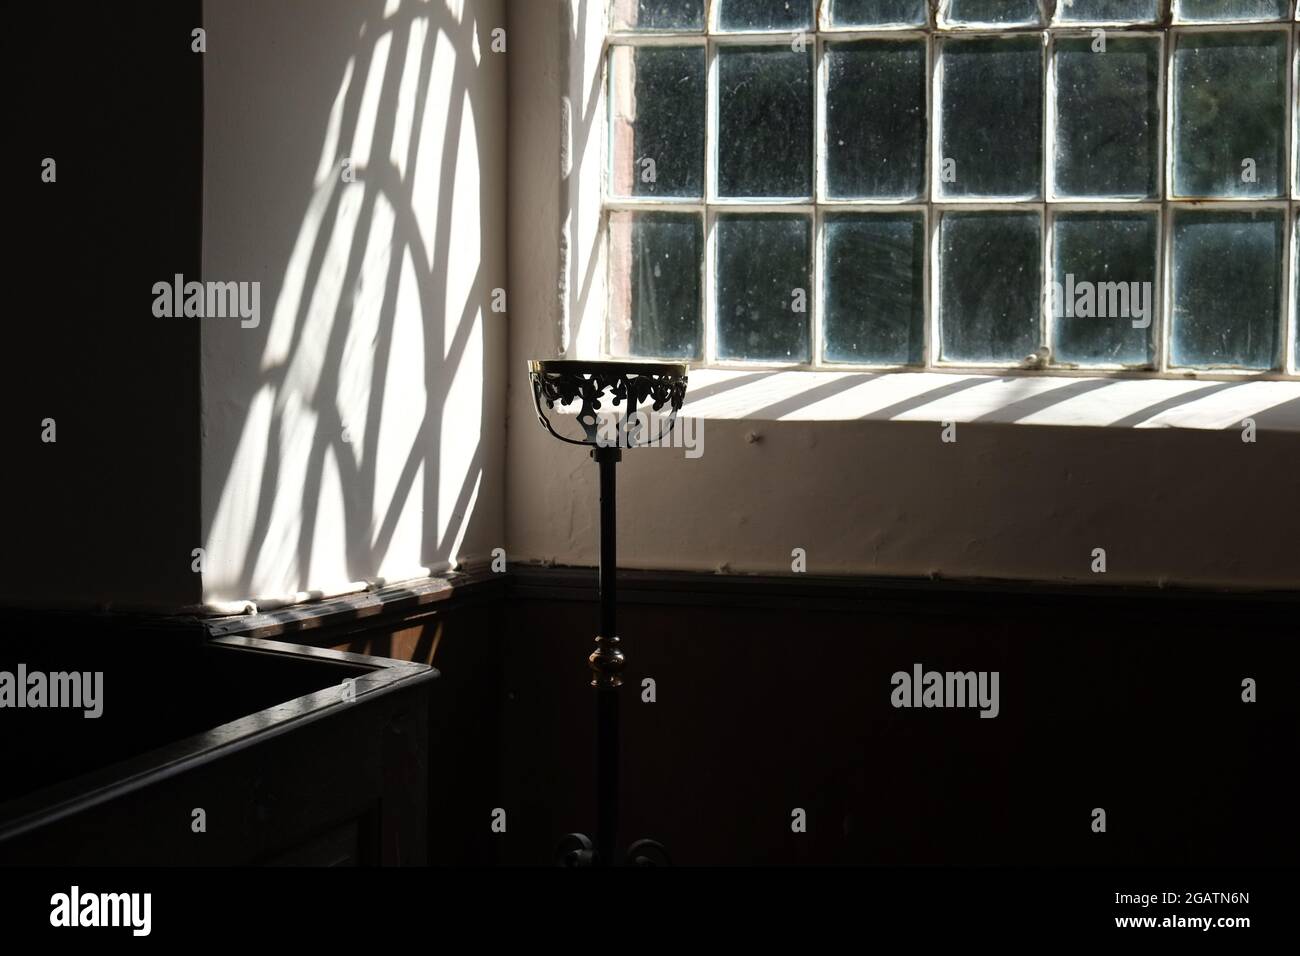 Light from window panes casts irregular geometric shadows on a church wall above the wainscotting. A brass flower bowl holder is silhouetted Stock Photo